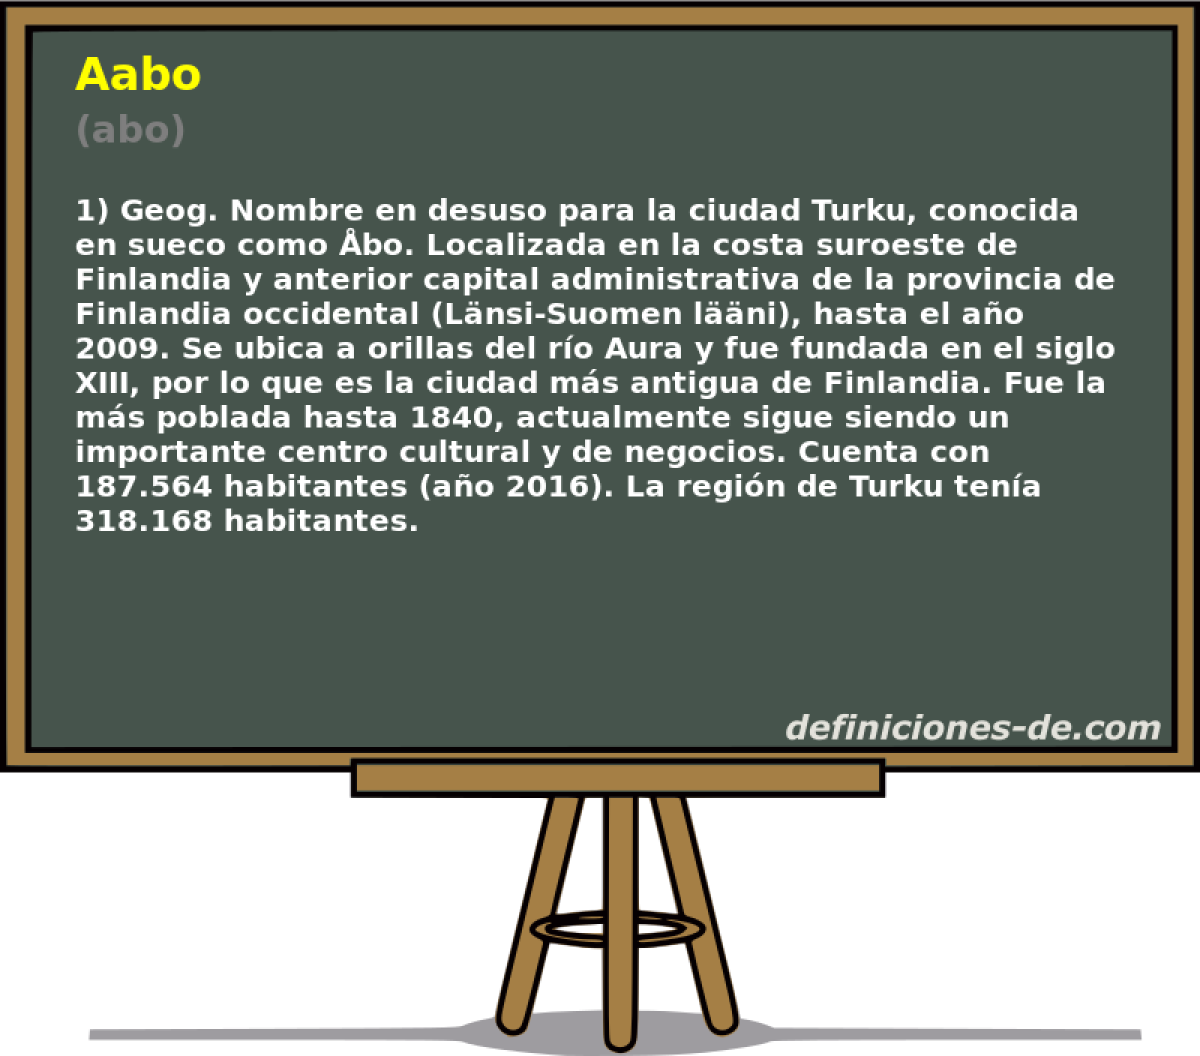 Aabo (abo)